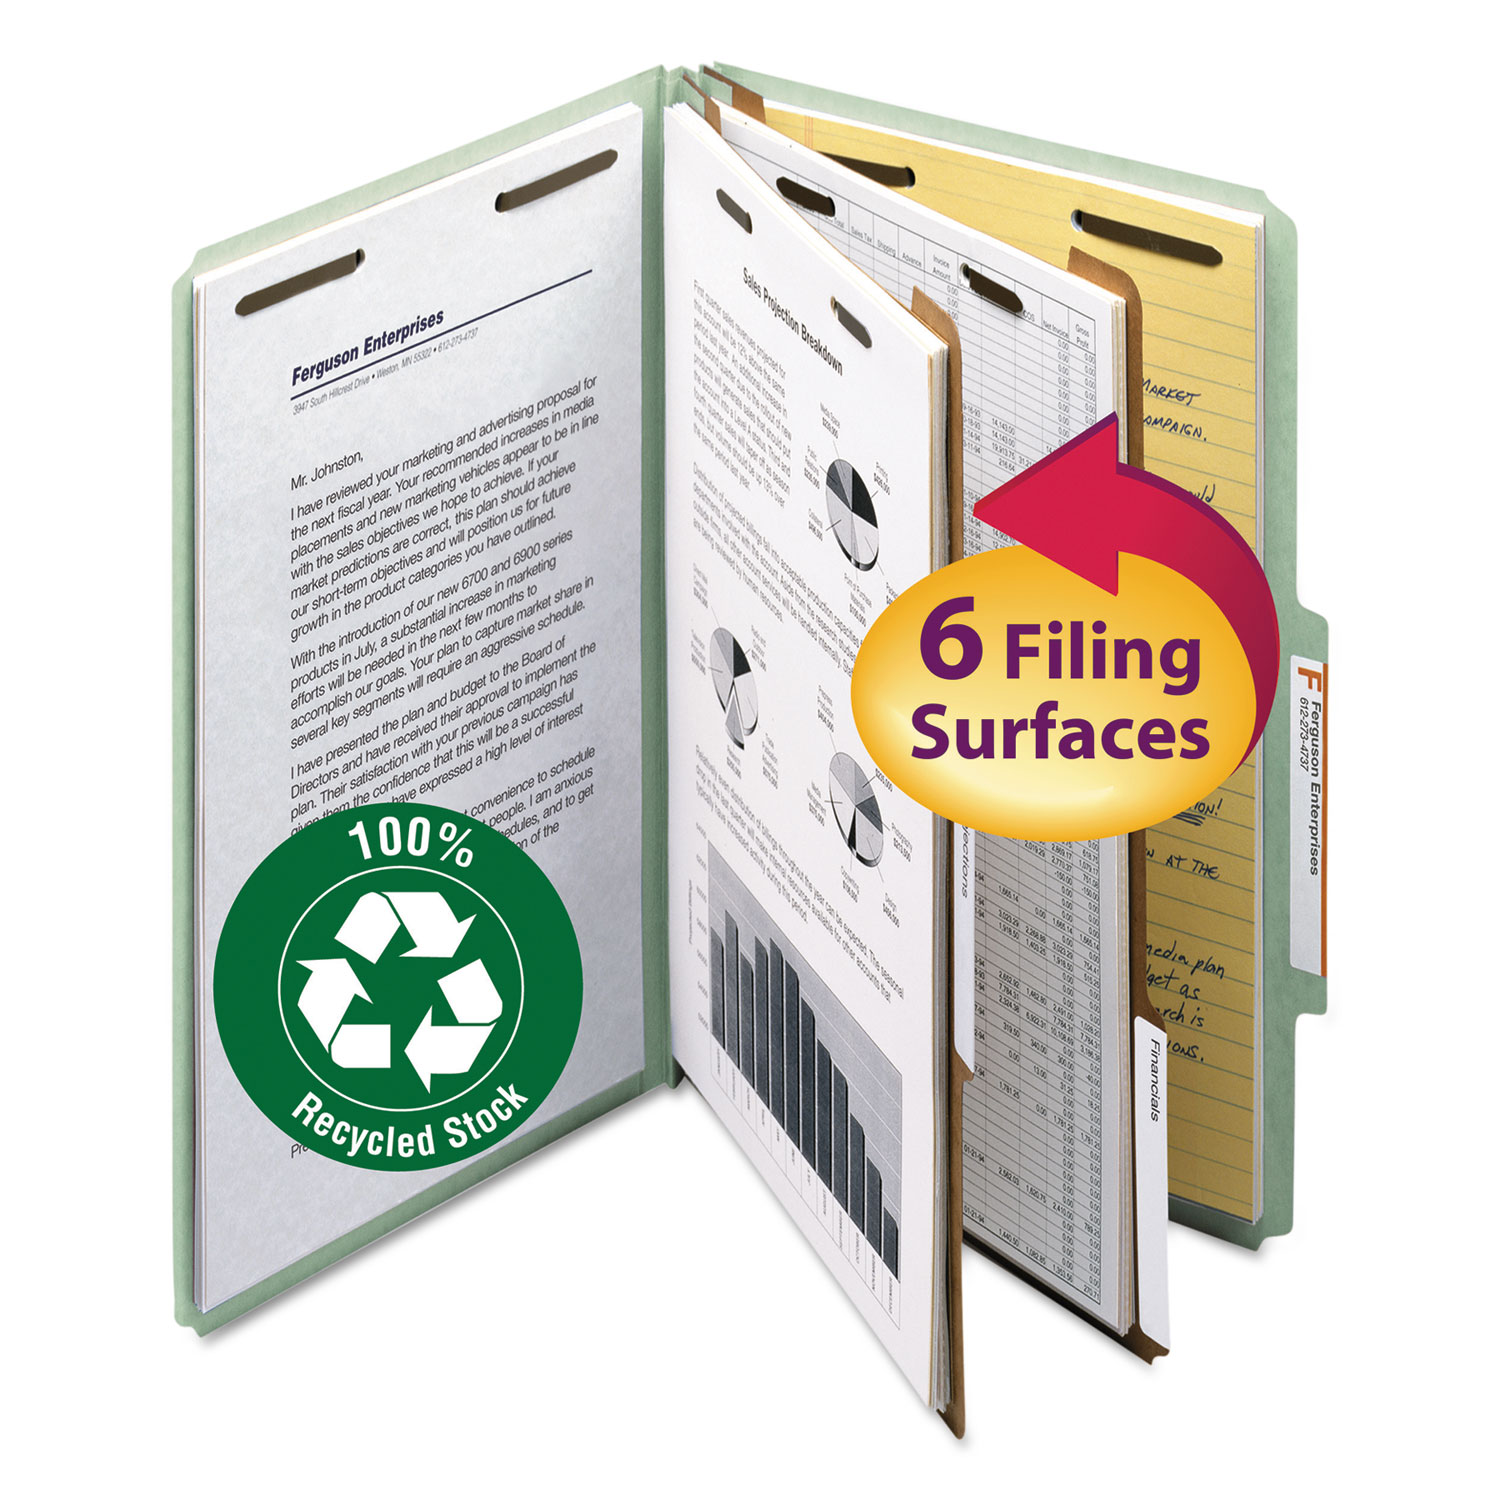  Smead 19022 100% Recycled Pressboard Classification Folders, 2 Dividers, Legal Size, Gray-Green, 10/Box (SMD19022) 